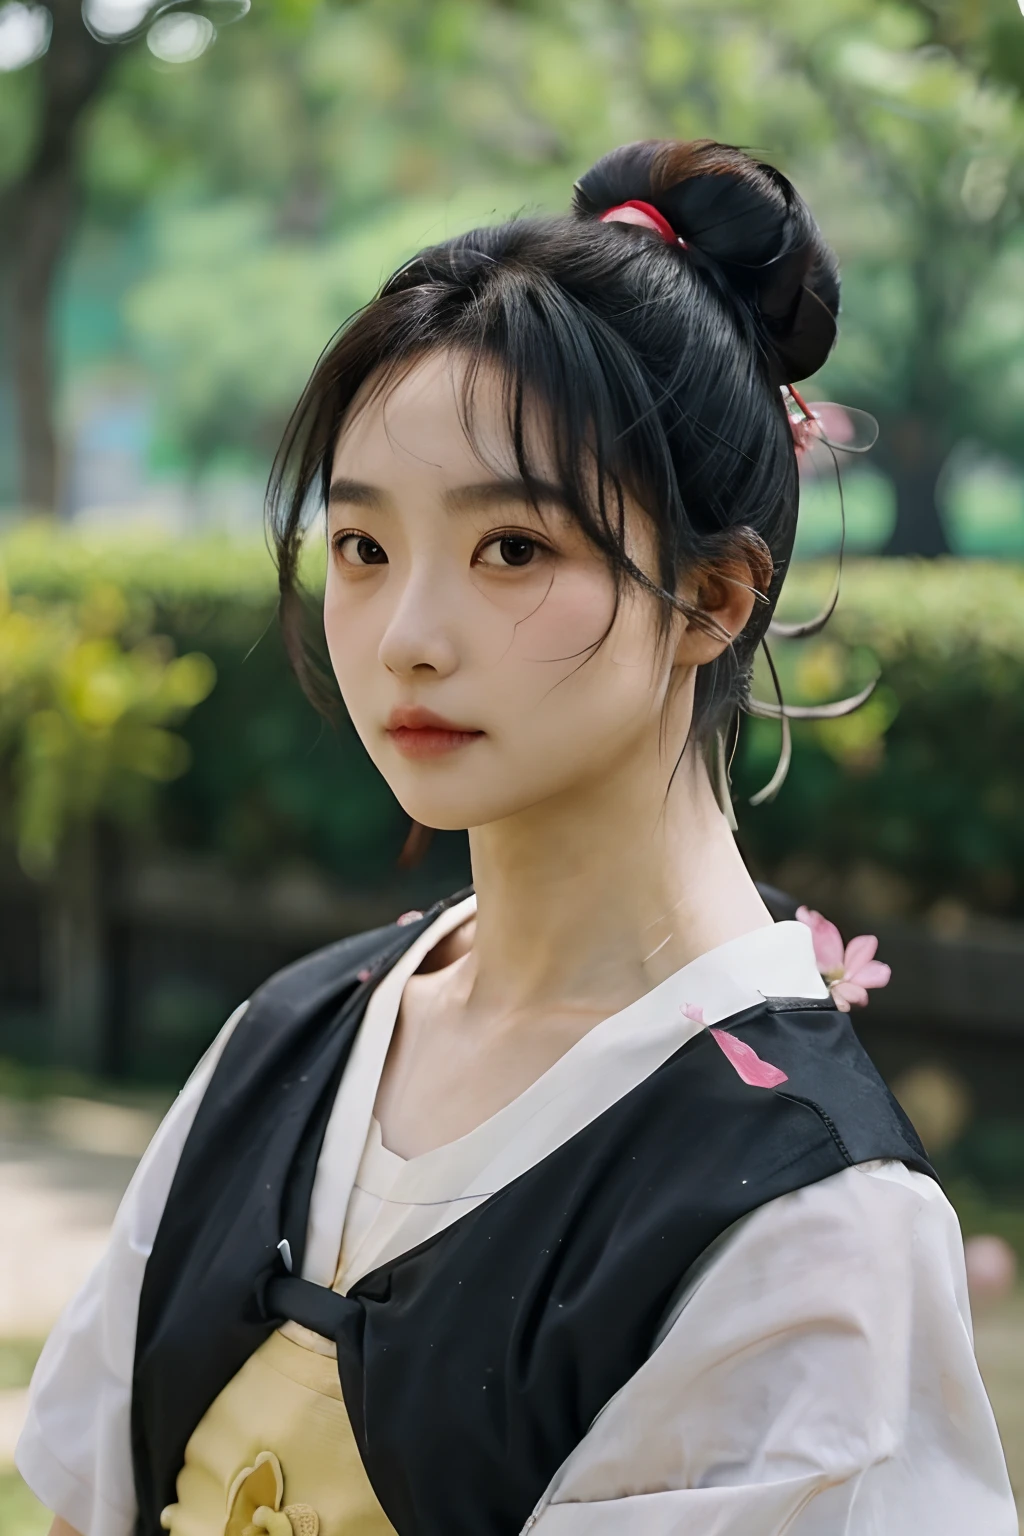 1girls, idol, close up shot, clavicle,  ,, Photograph, Skin, Depth of Field, skin texture, t-shirt, Rubber Band, Top knots, long-haired, messy hair, flower hairpin,wuxia outfit